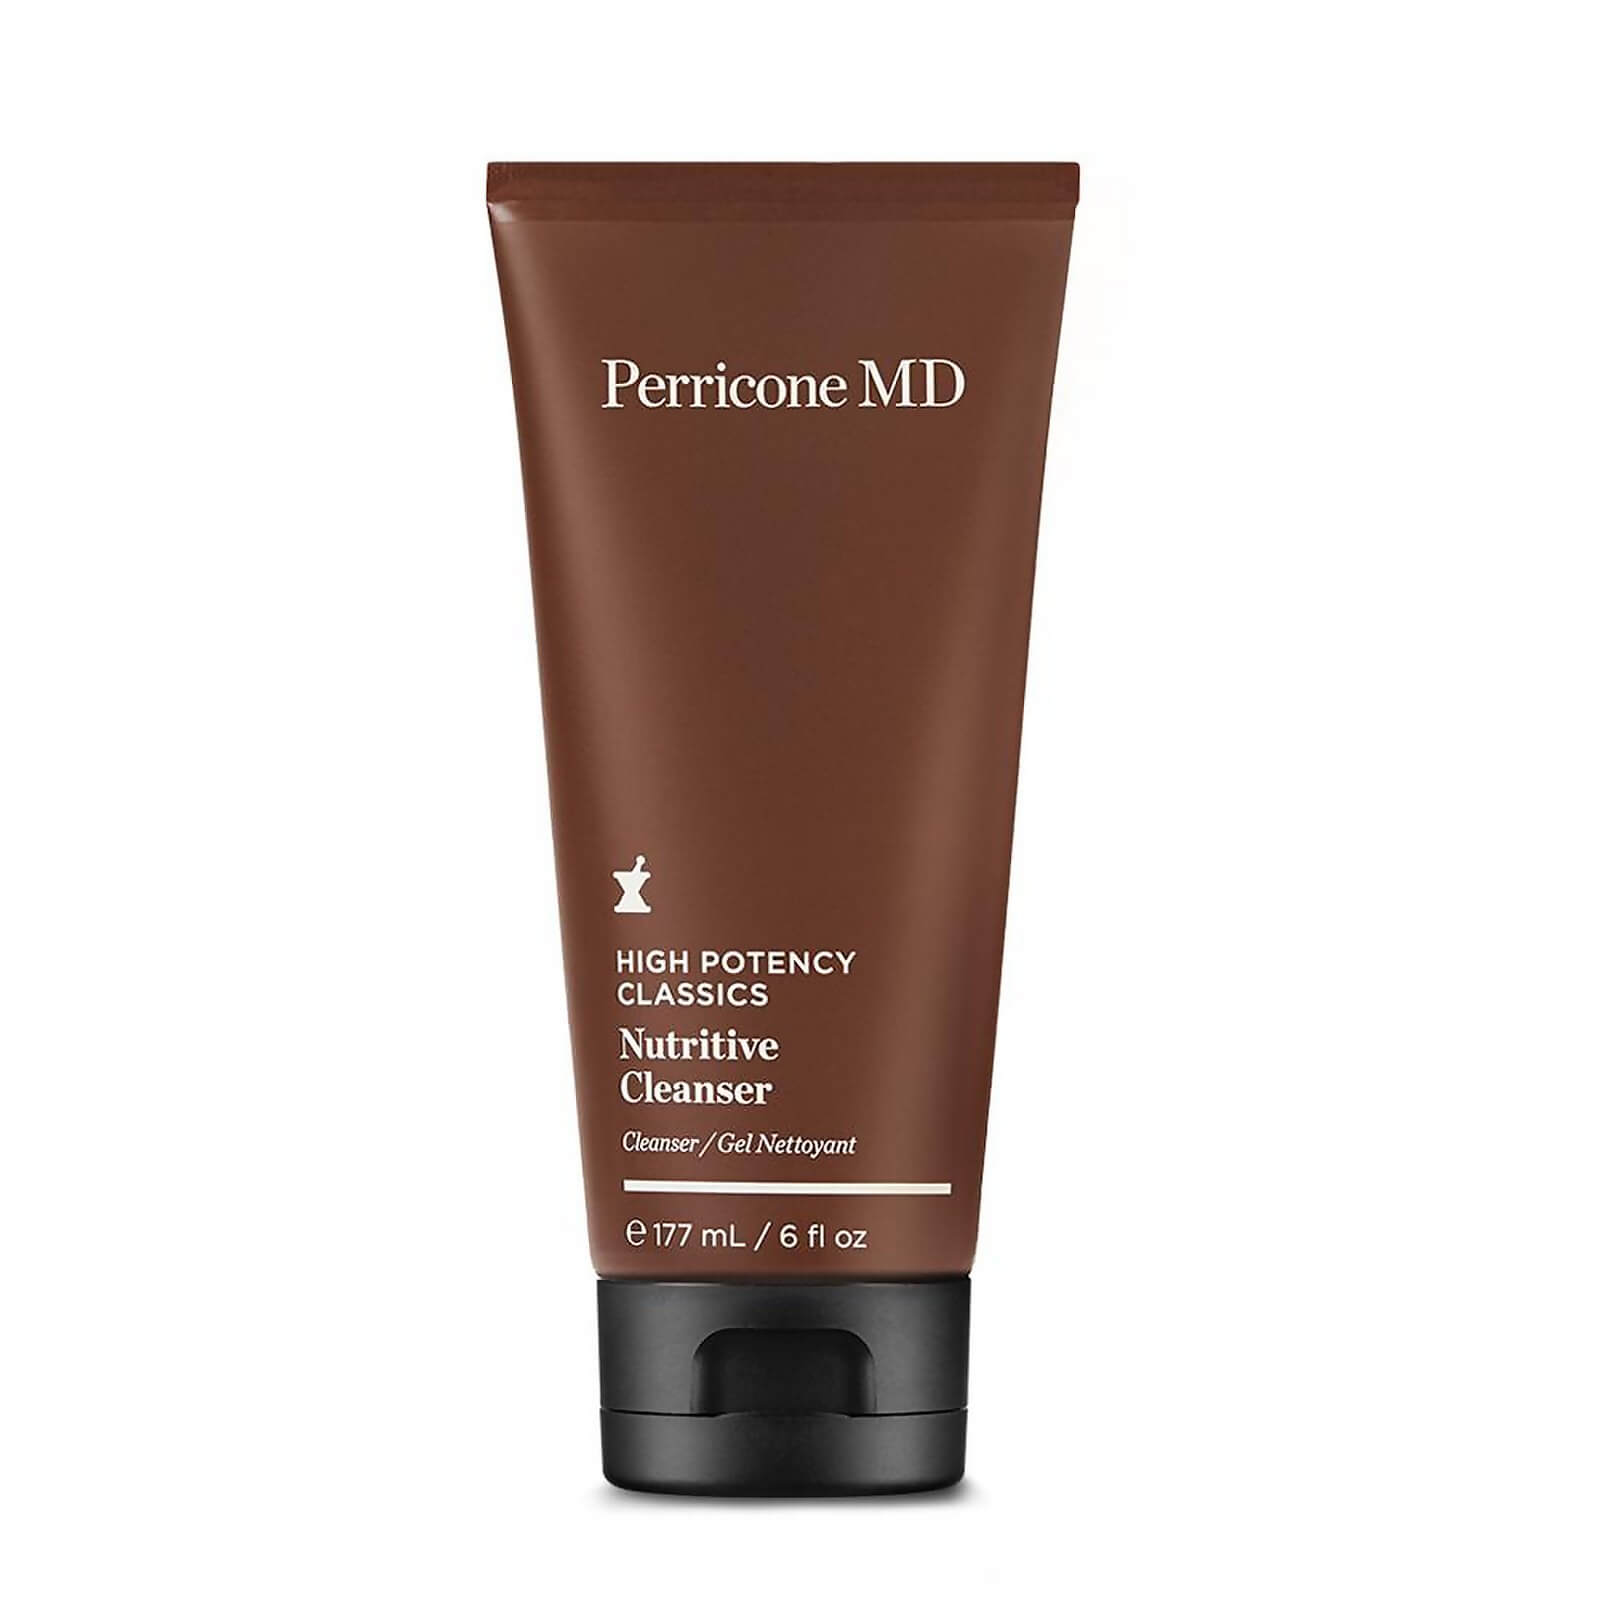 Photos - Facial / Body Cleansing Product Perricone MD High Potency Classics Nutritive Cleanser 177ml 52430001EU 